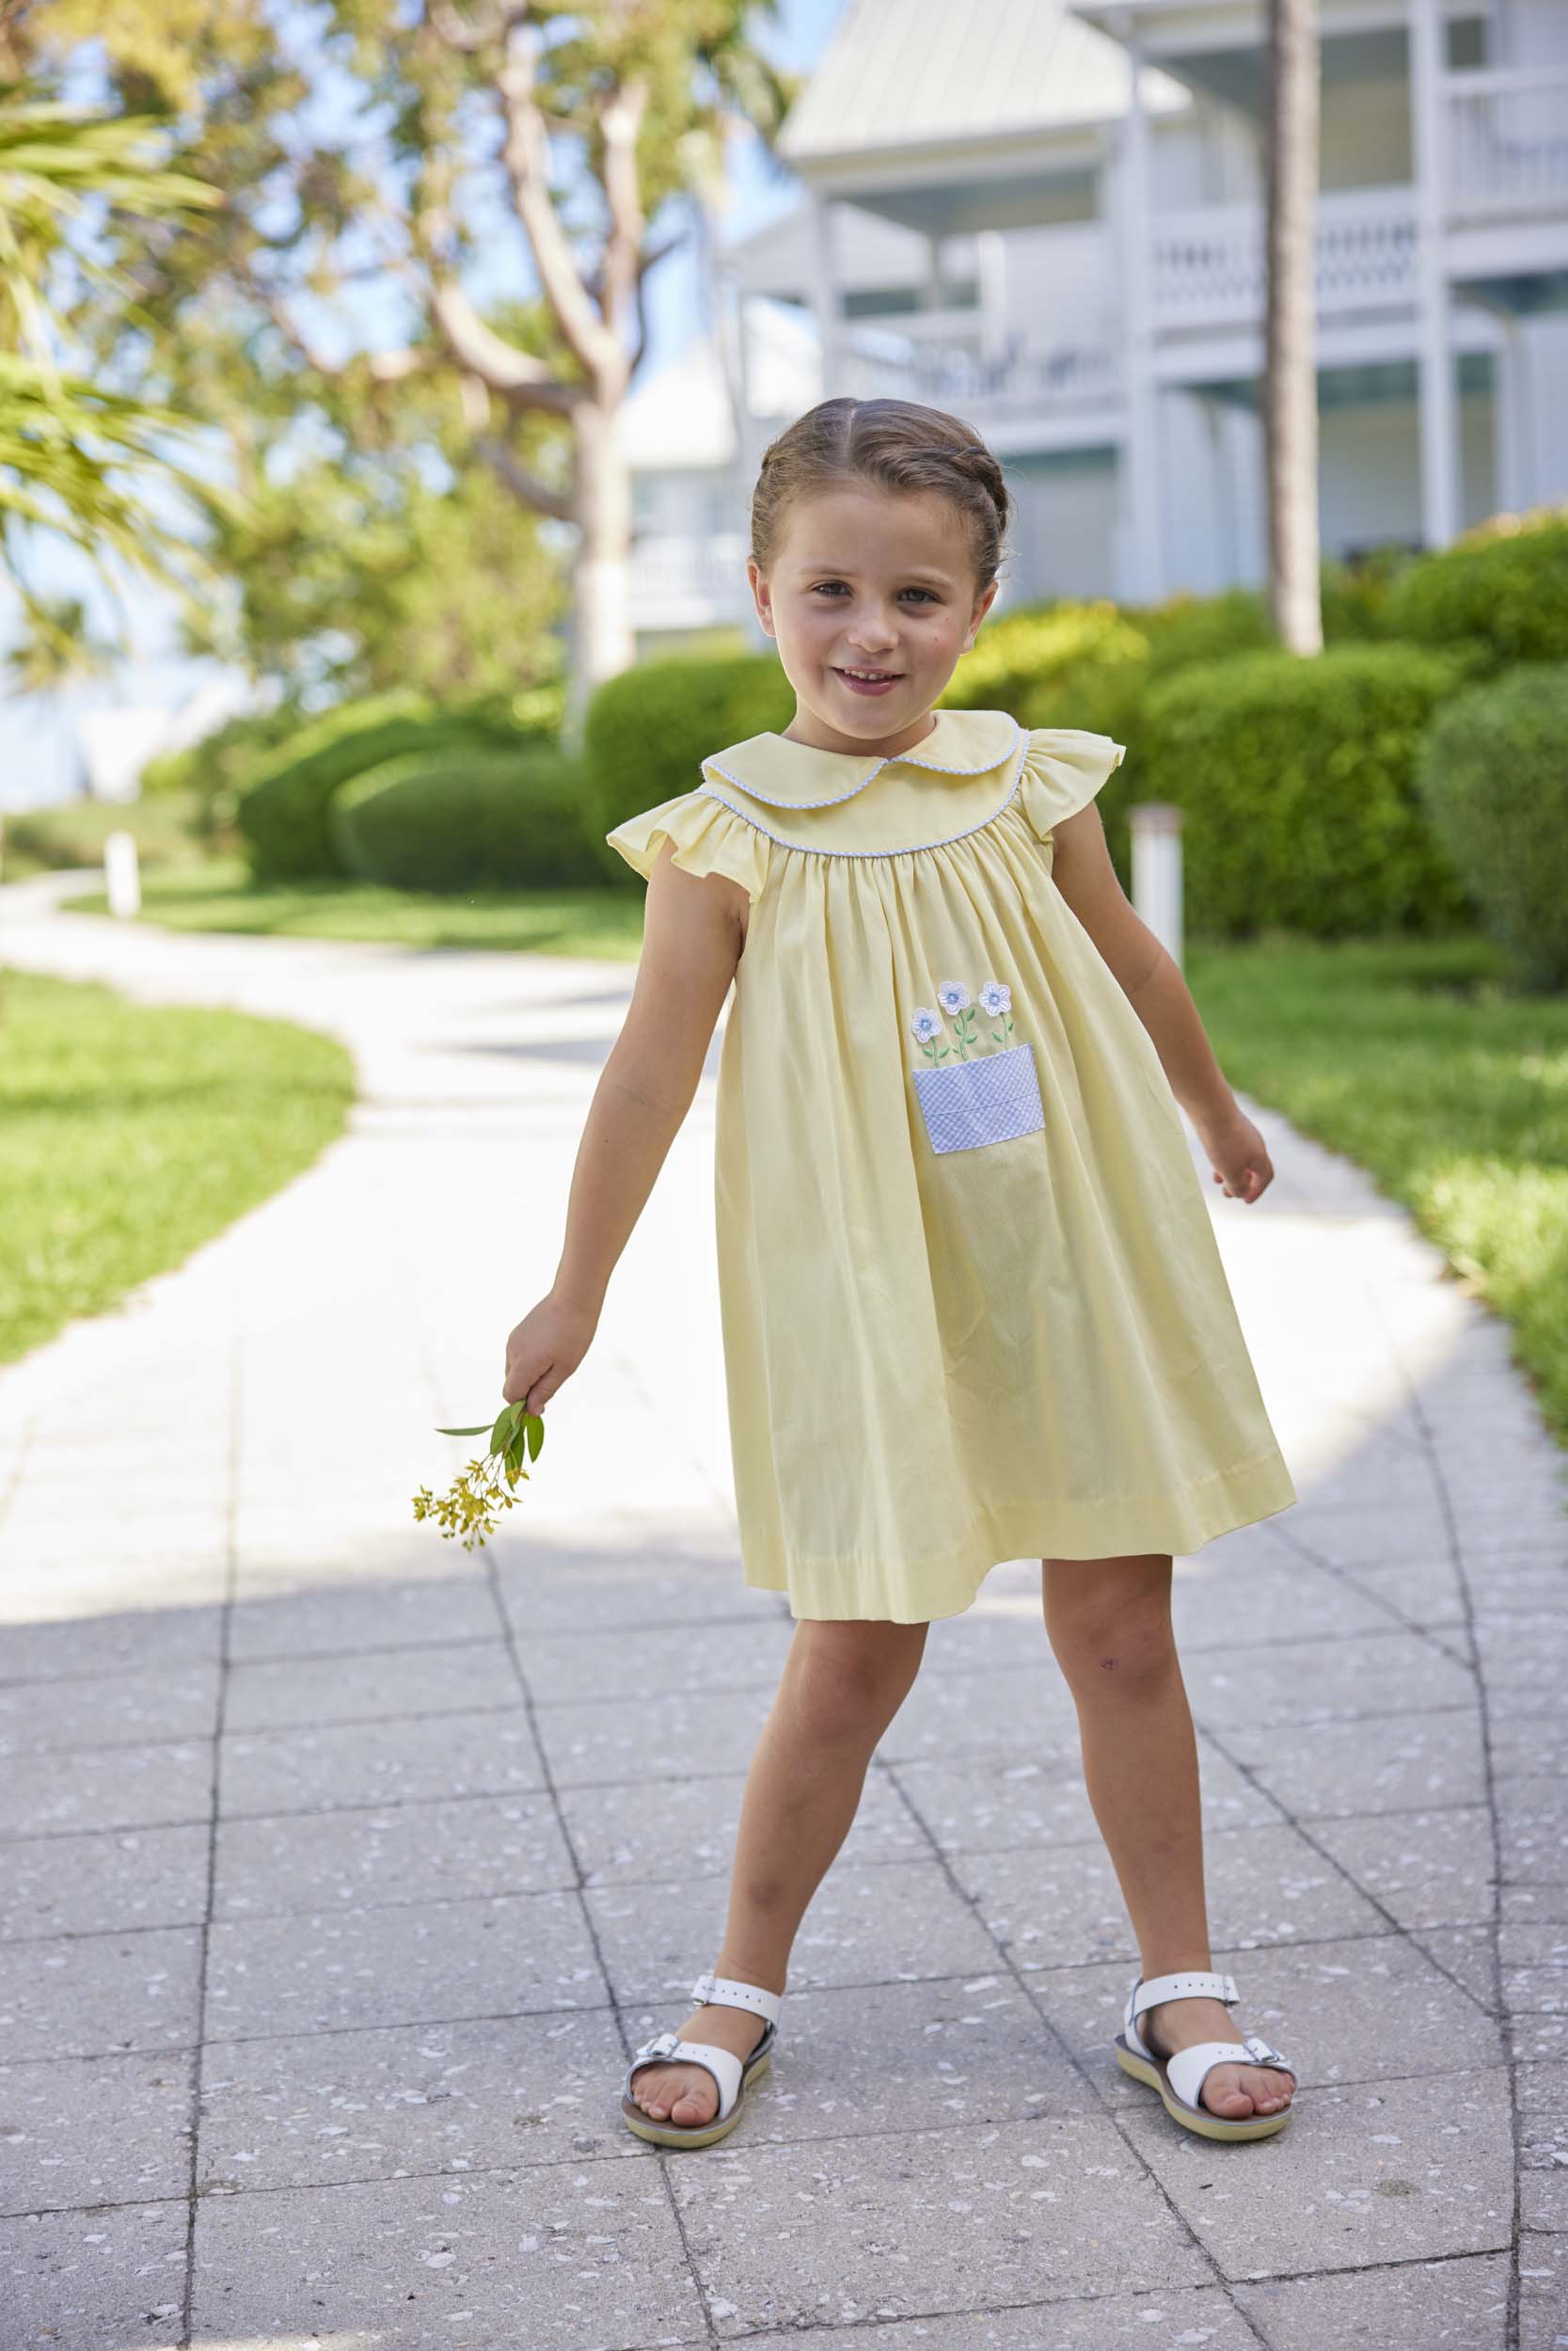 classic childrens clothing yellow dress with peter pan collar and front pocket with daisy embroidery